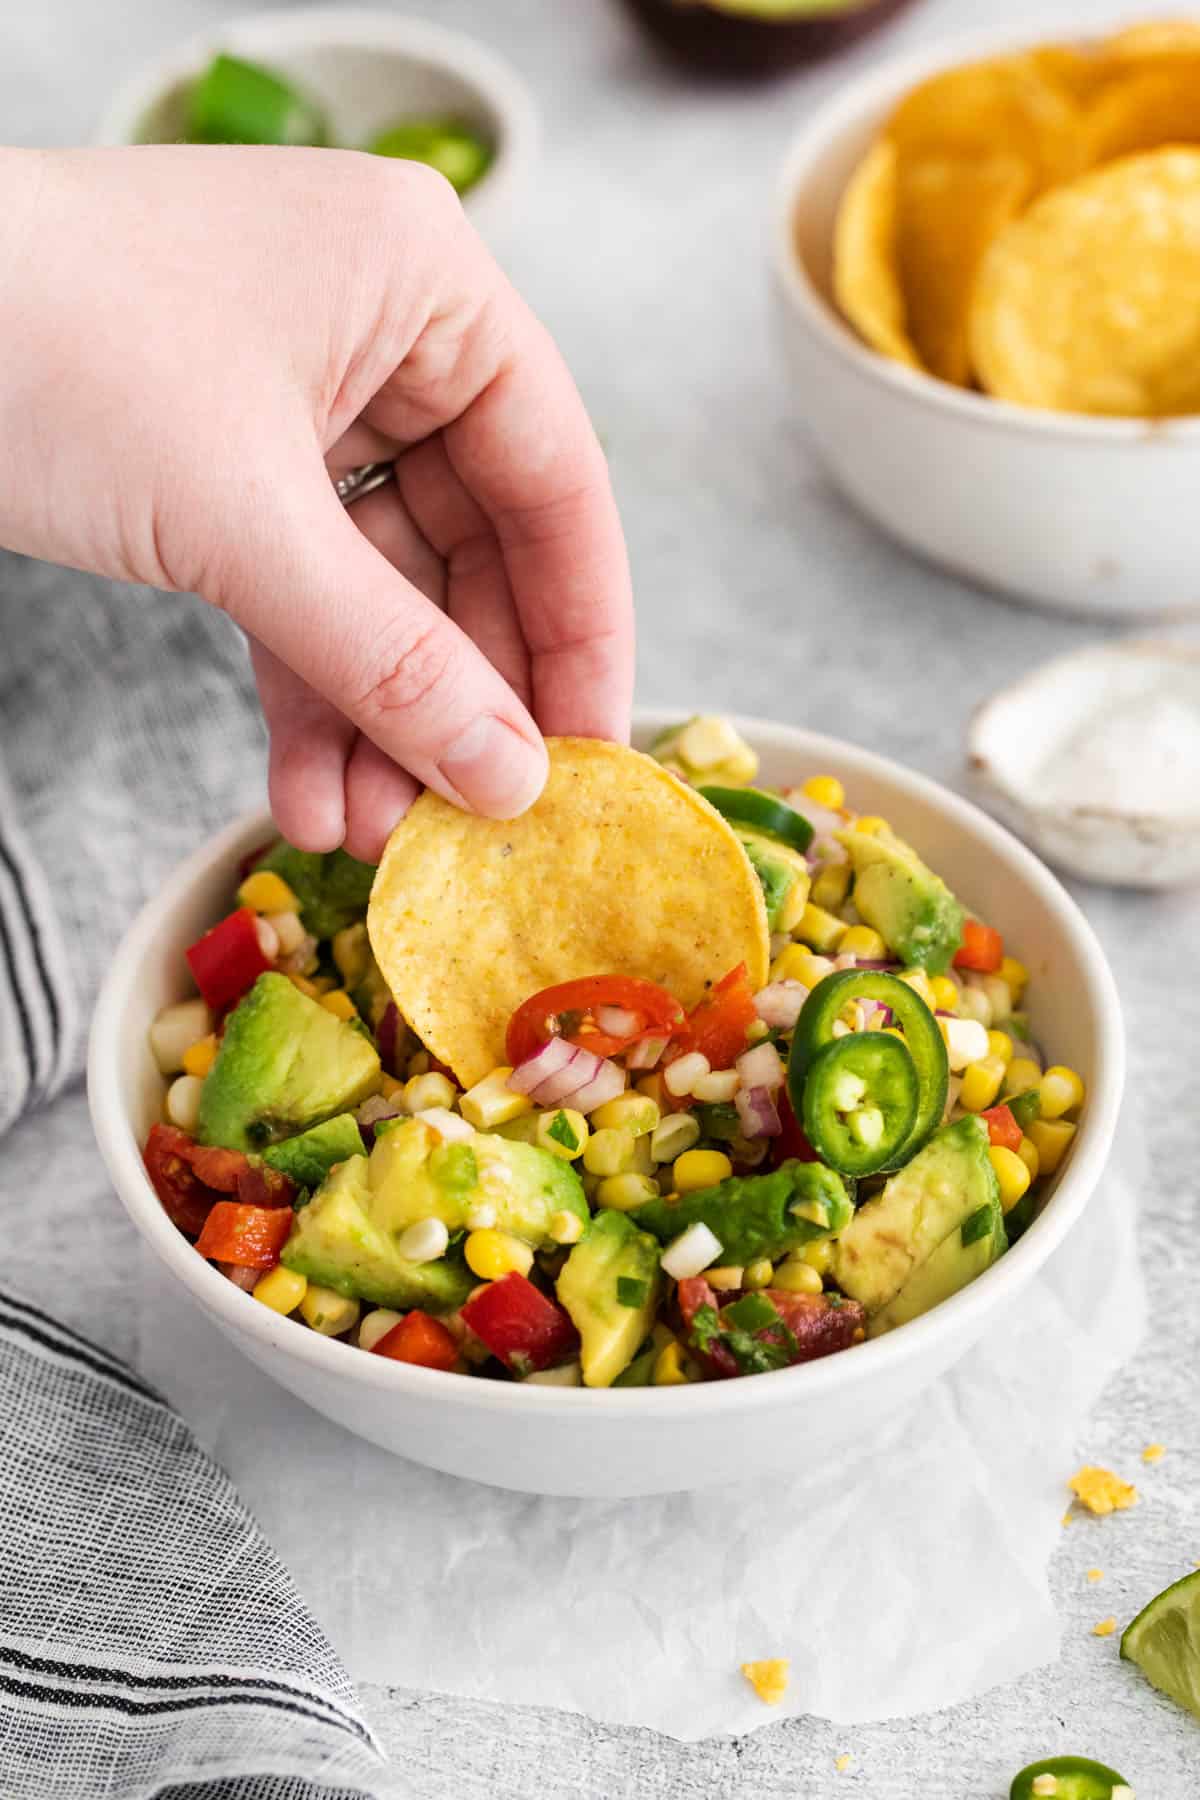 A hand holding a chip to scoop corn & avocado salad from a bowl.